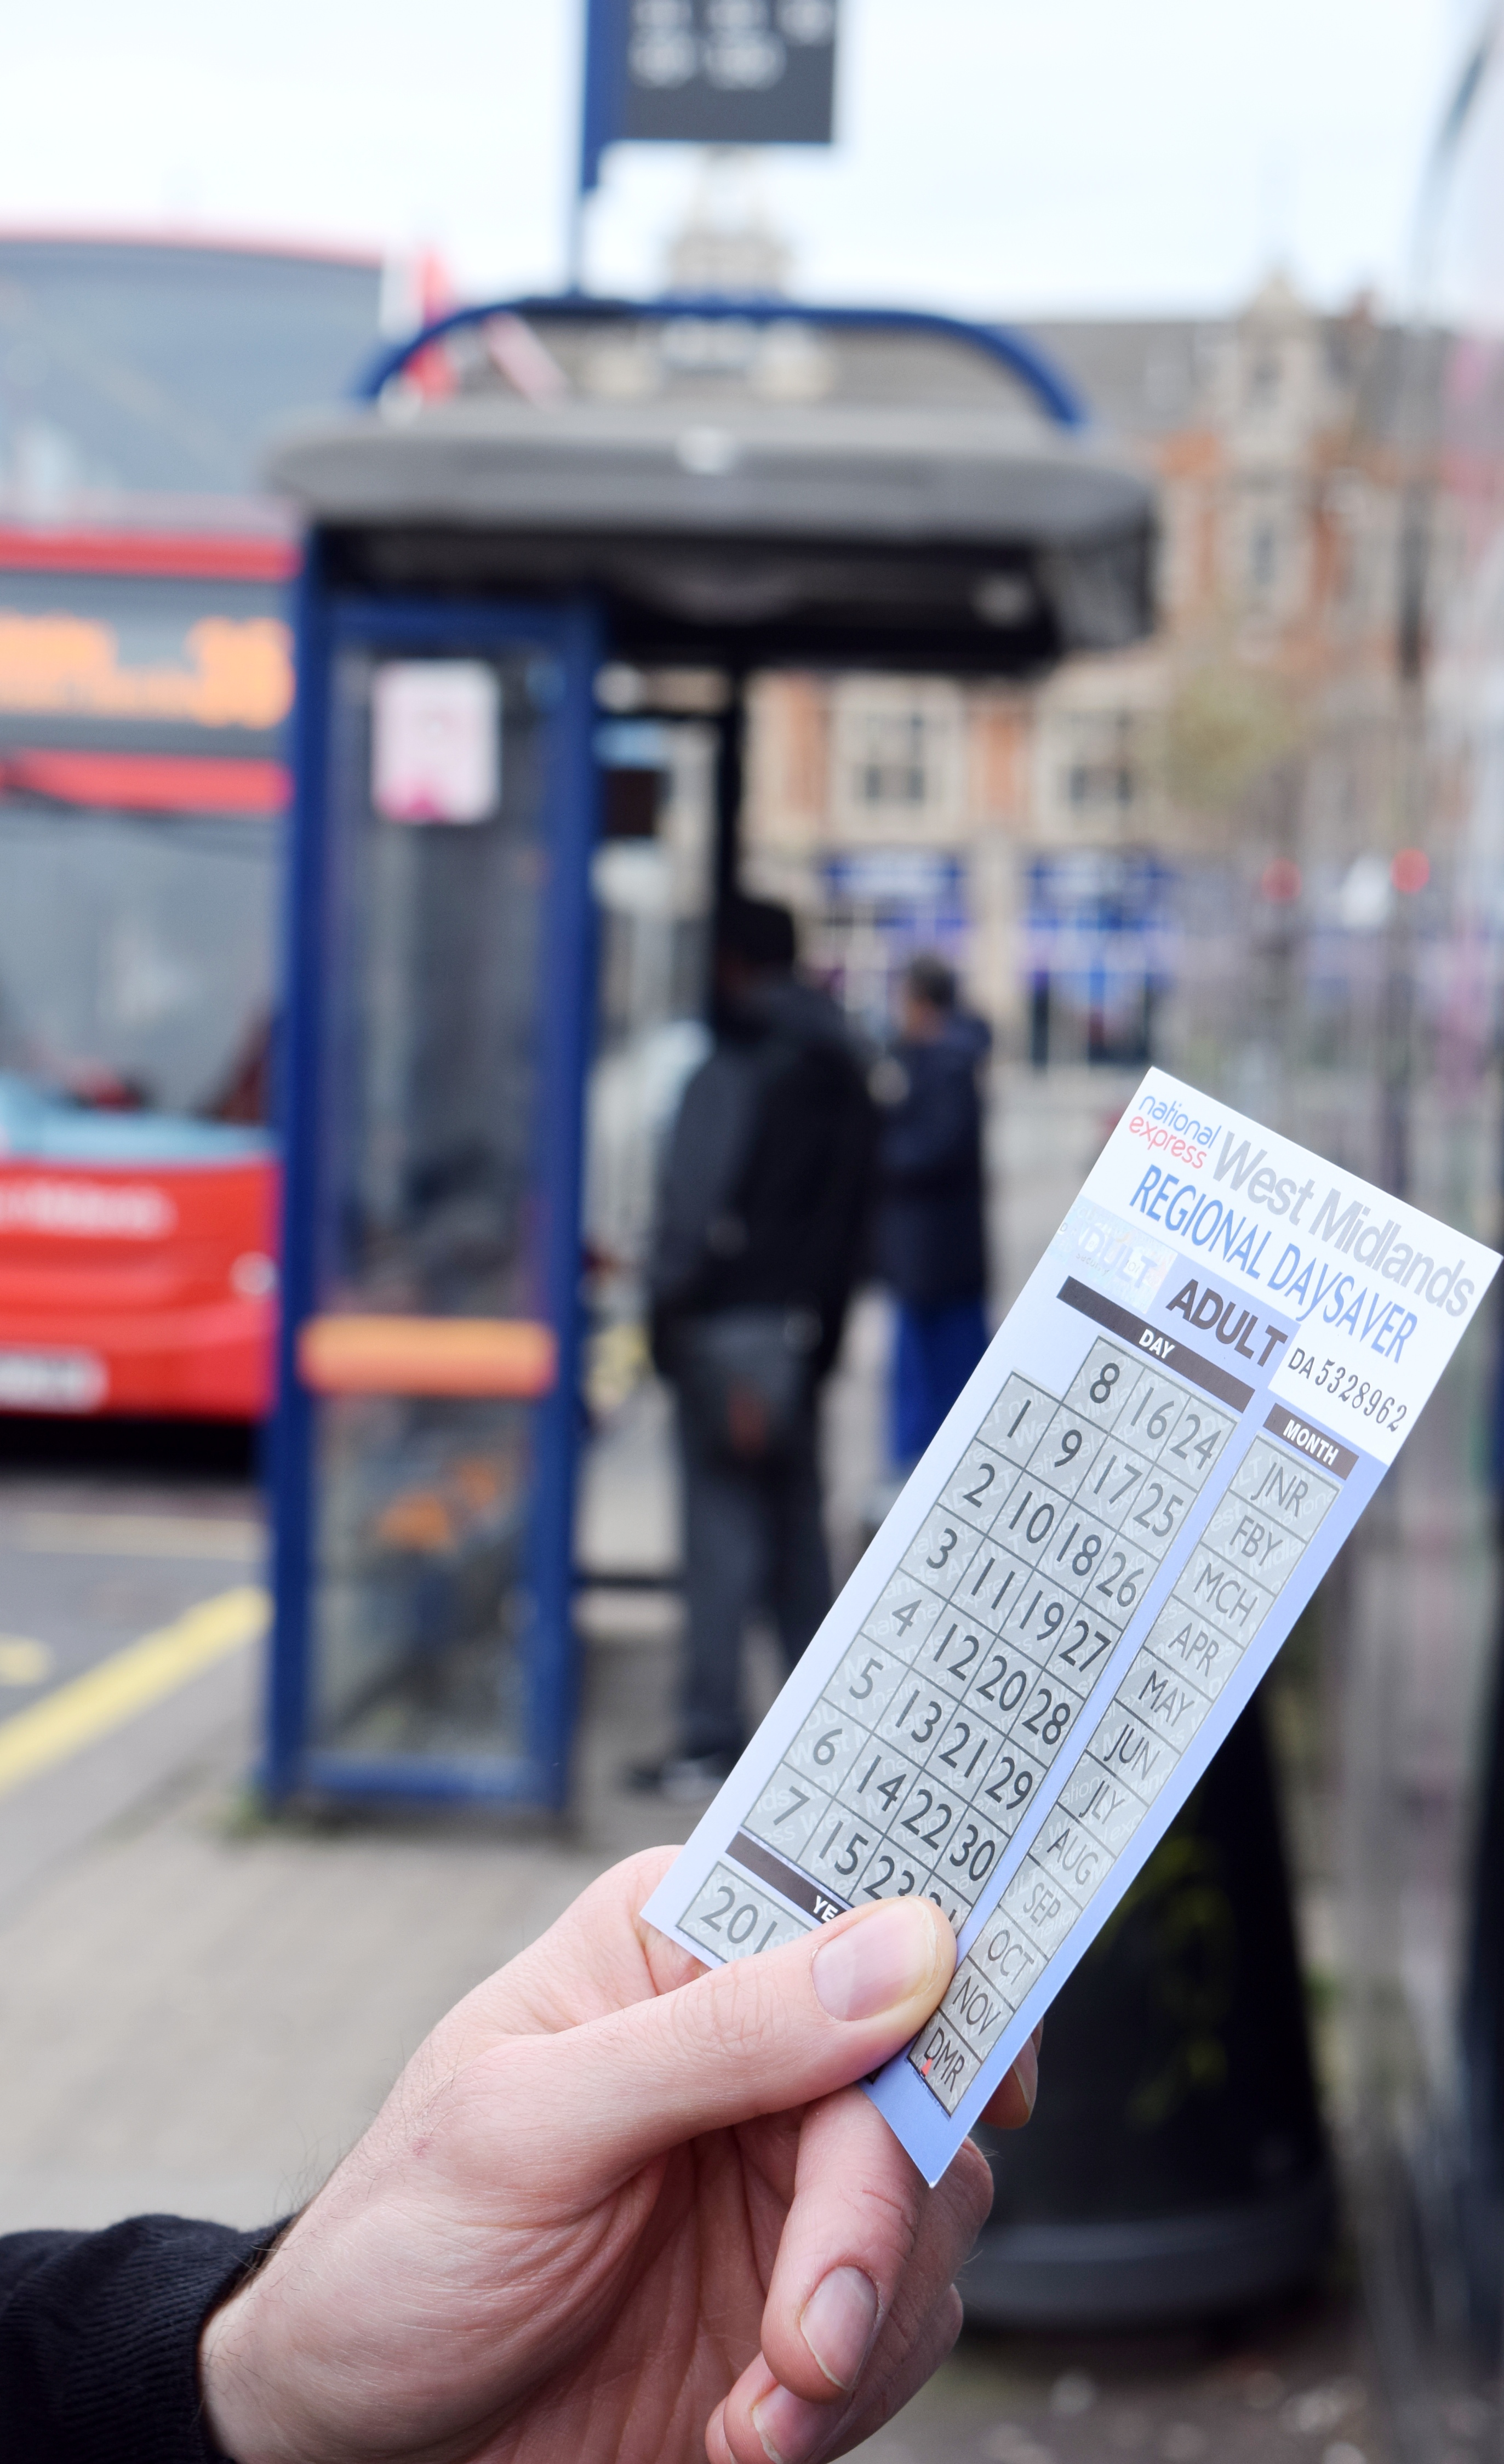 The scratchcard tickets will allow a rough sleeper to travel to where they can get help.